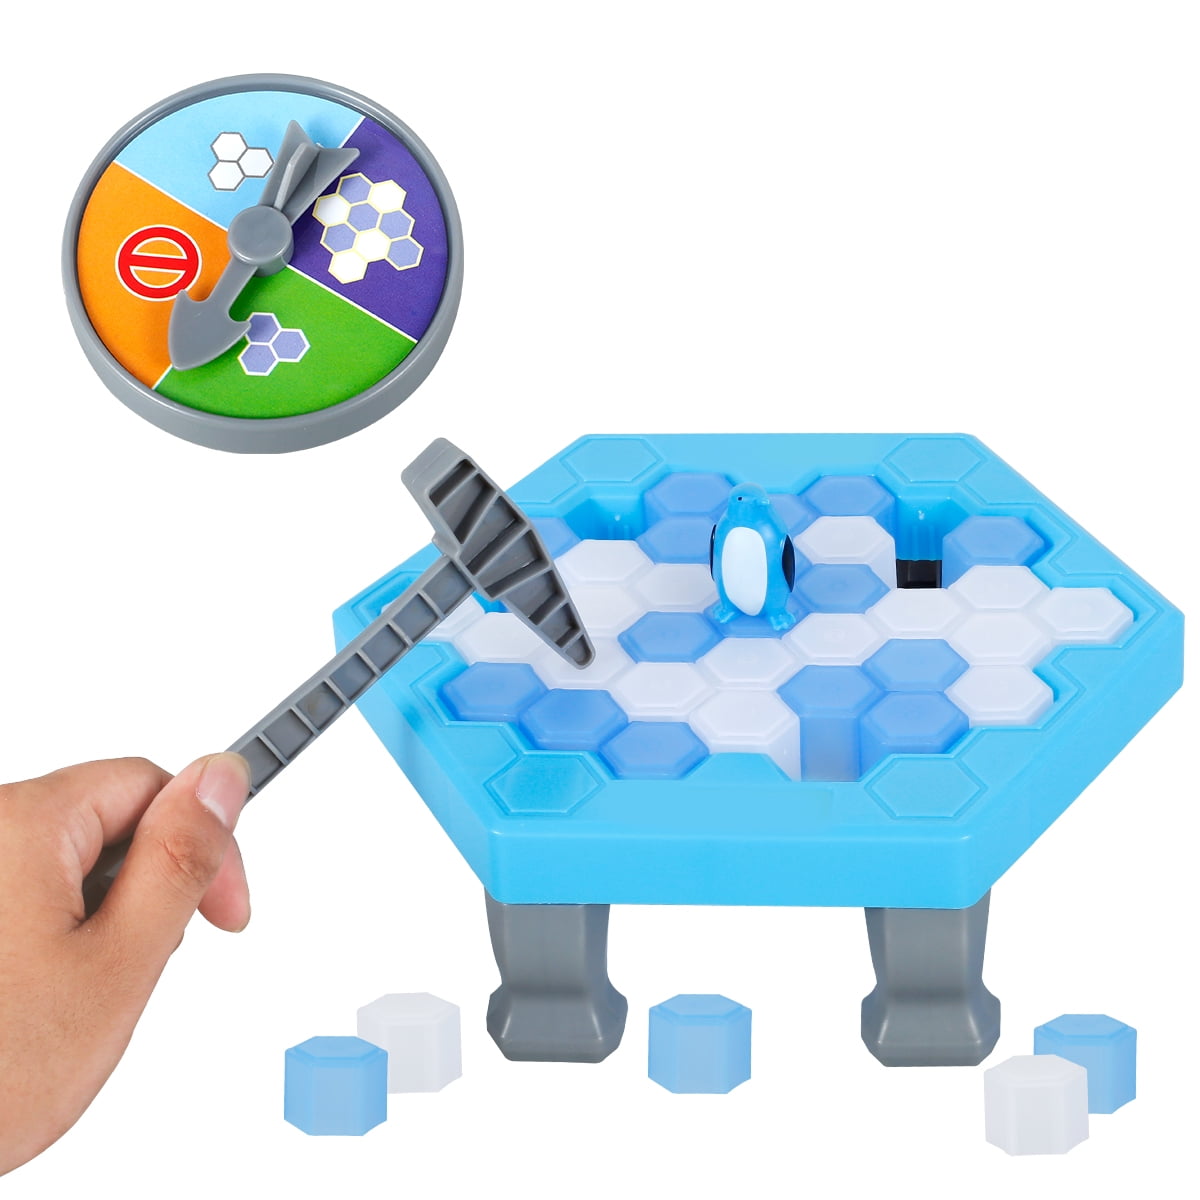  SS Save Penguin On Ice Game, Penguin Trap Break ice Activate  Family Party Ice Breaking Kids Puzzle Table Knock Block : Toys & Games